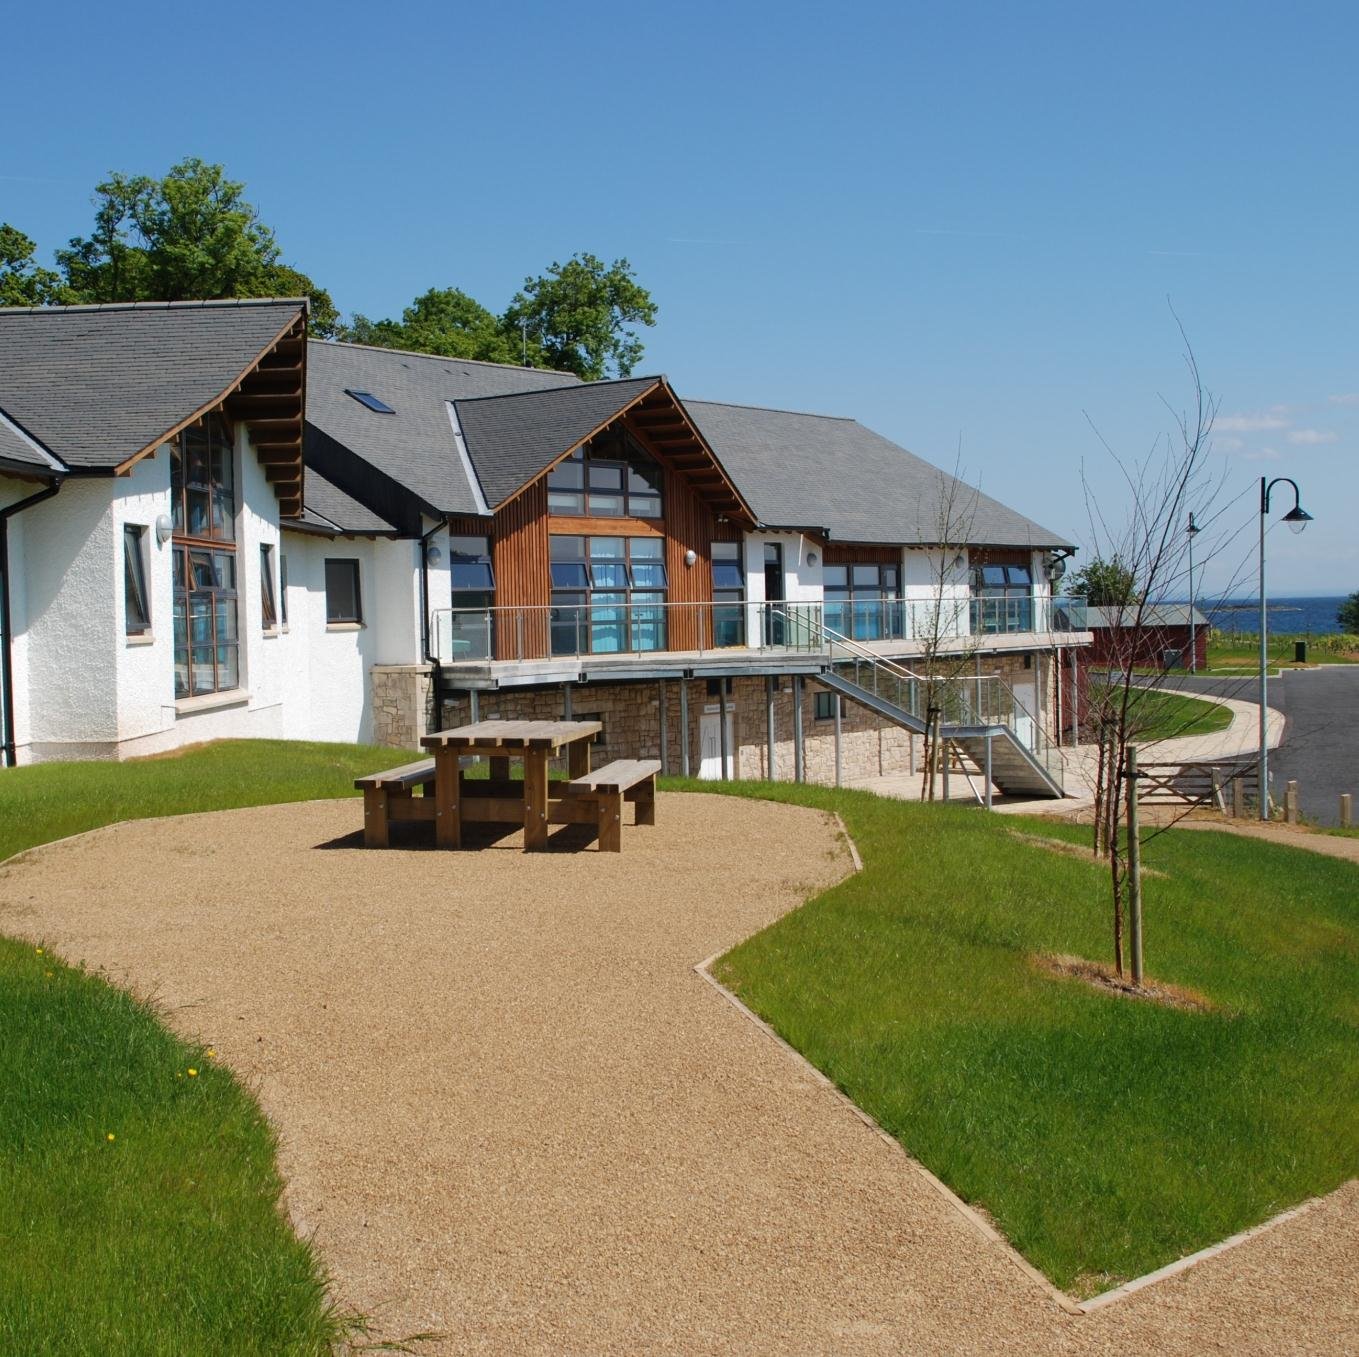 A view of the front of Arran Outdoor Education Centre